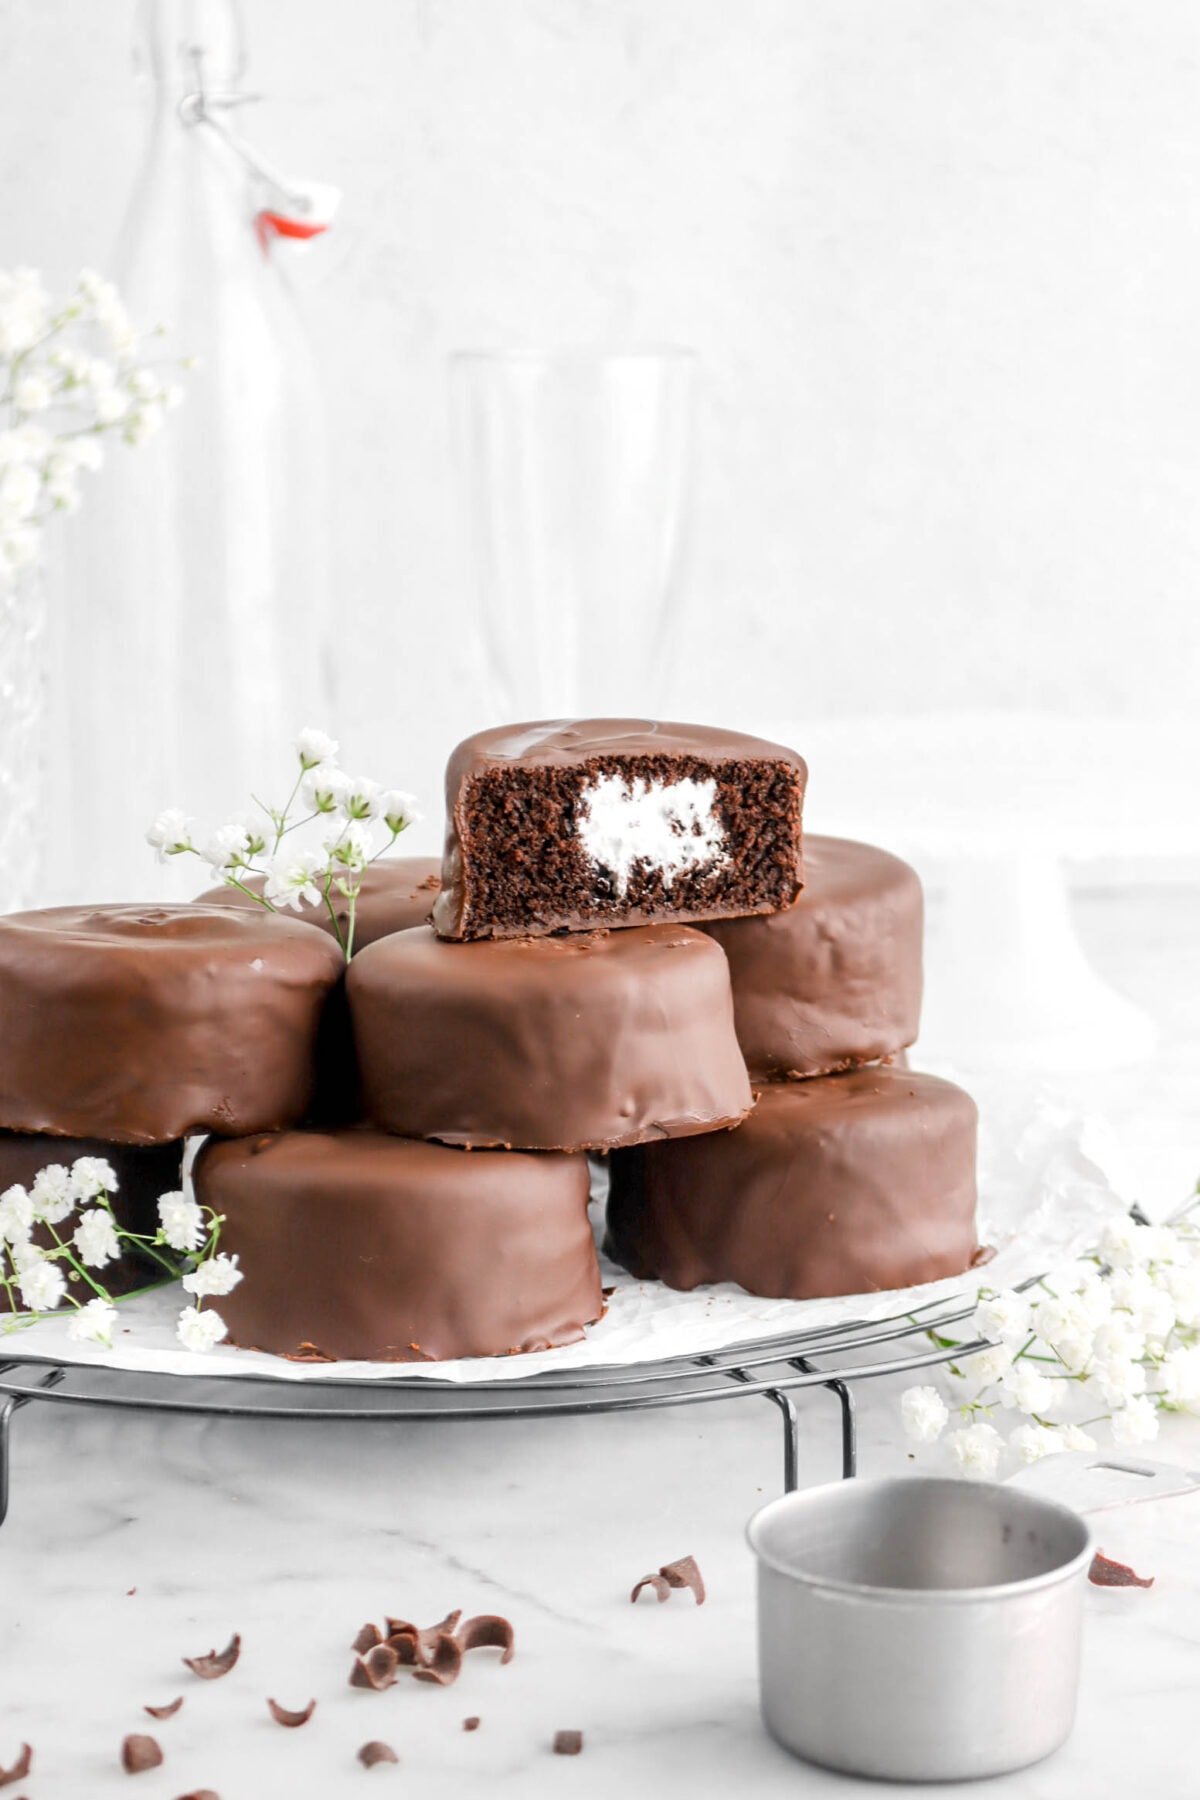 mini chocolate coated cakes with one cut in half exposing marshmallow center